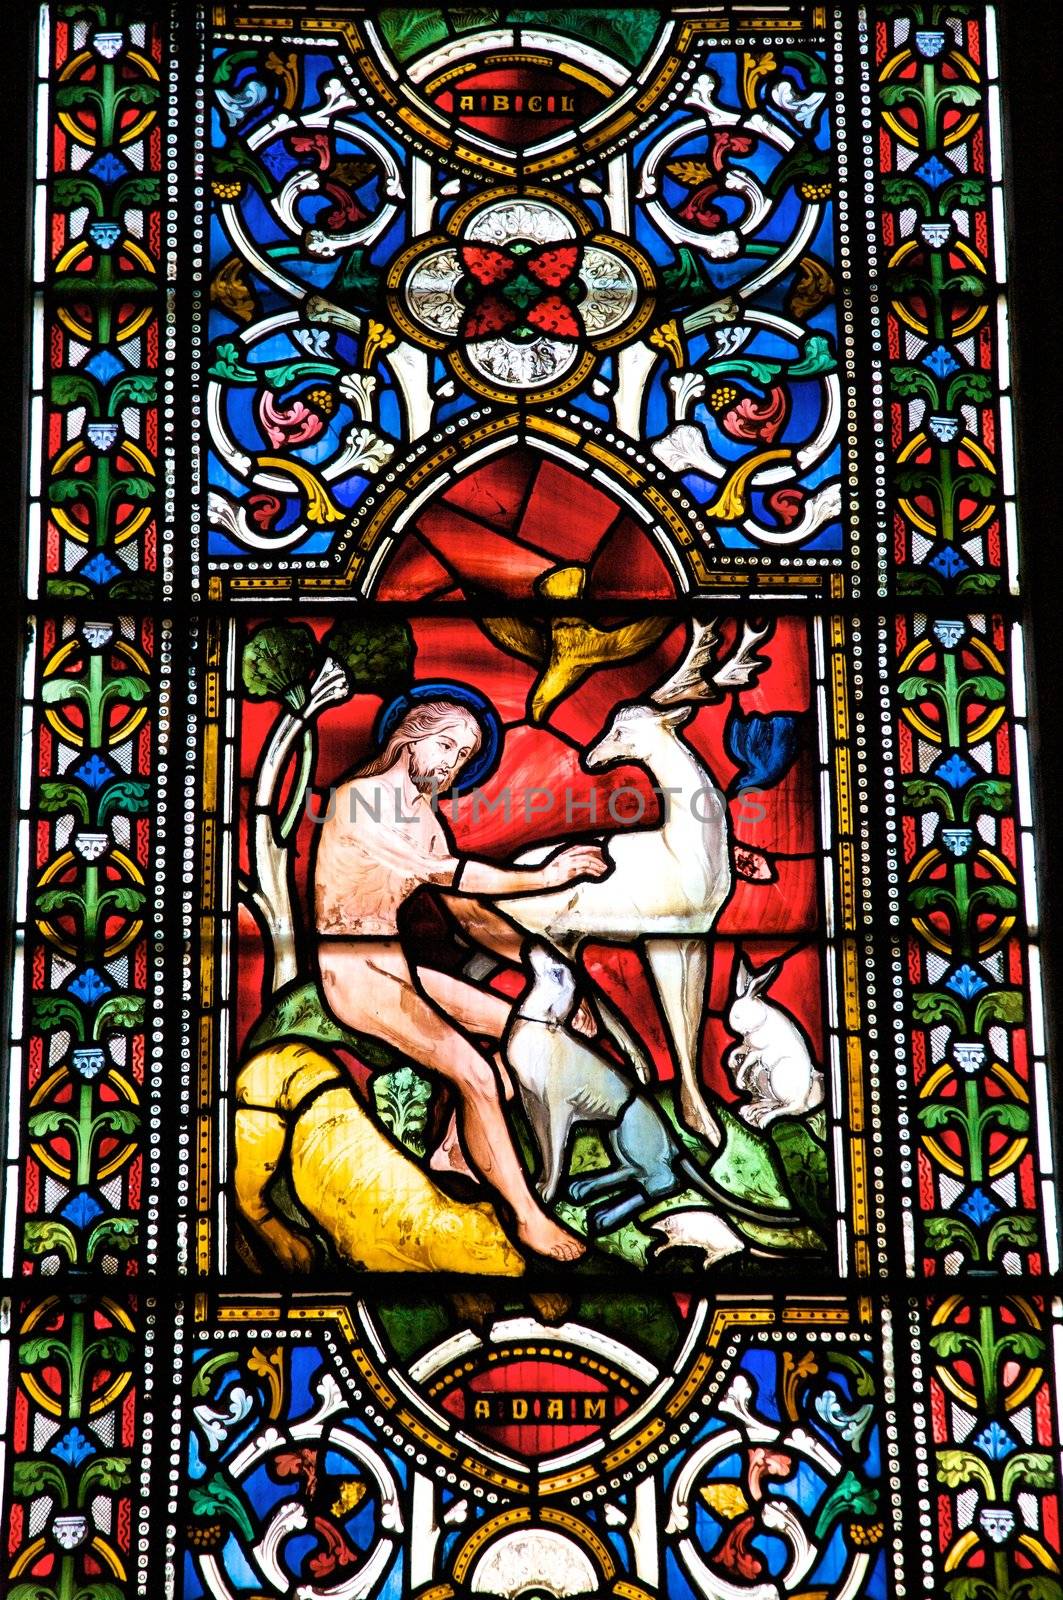 coloured glasswork painted nude christ and animals